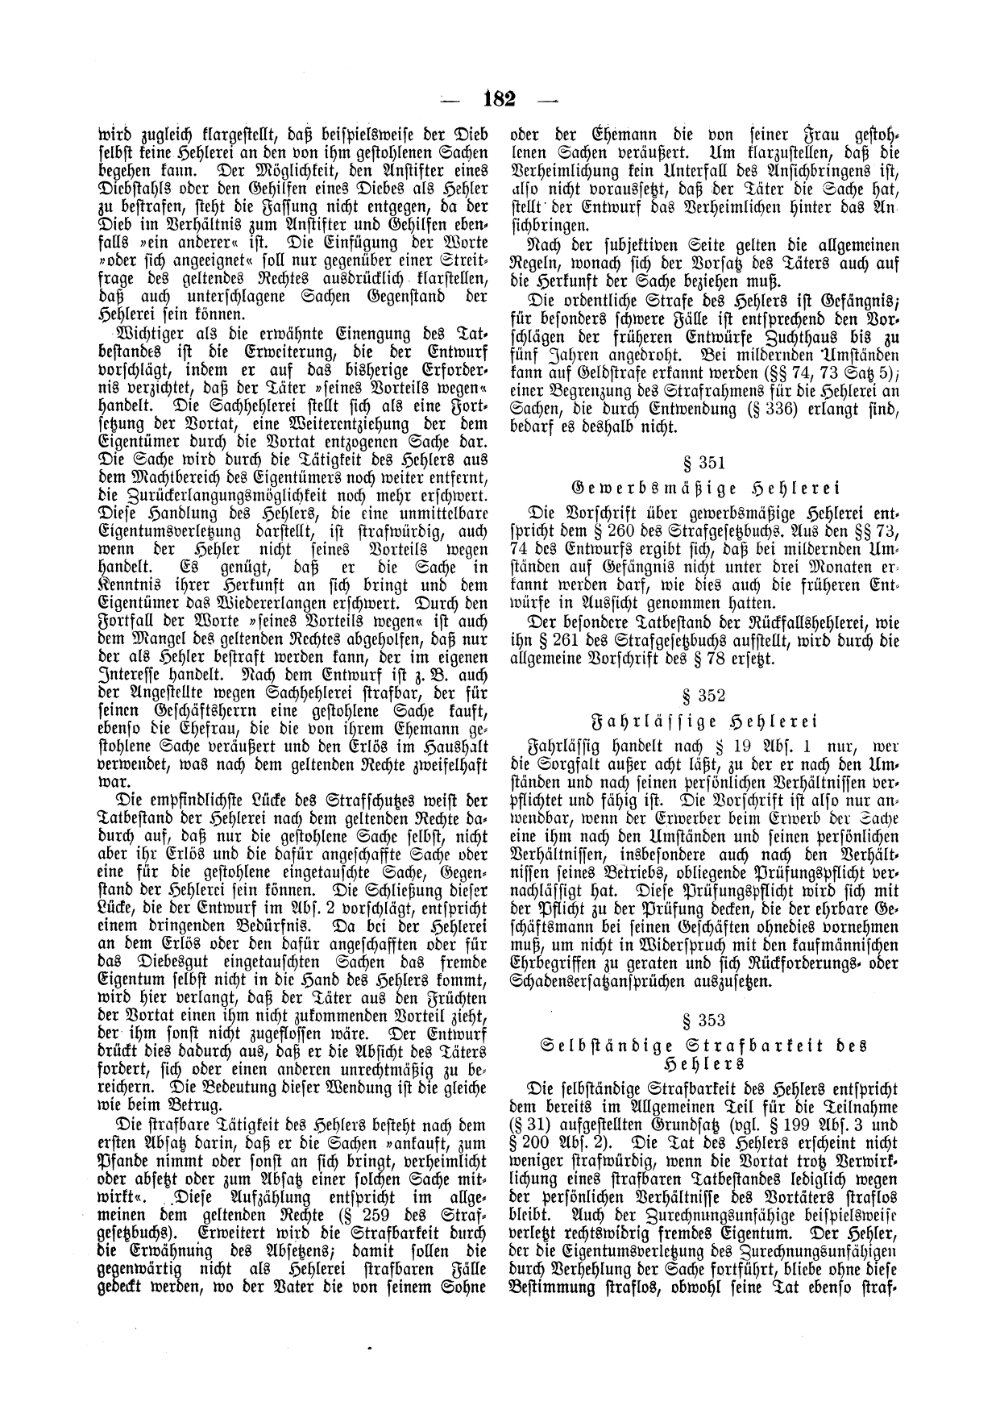 Scan of page 182